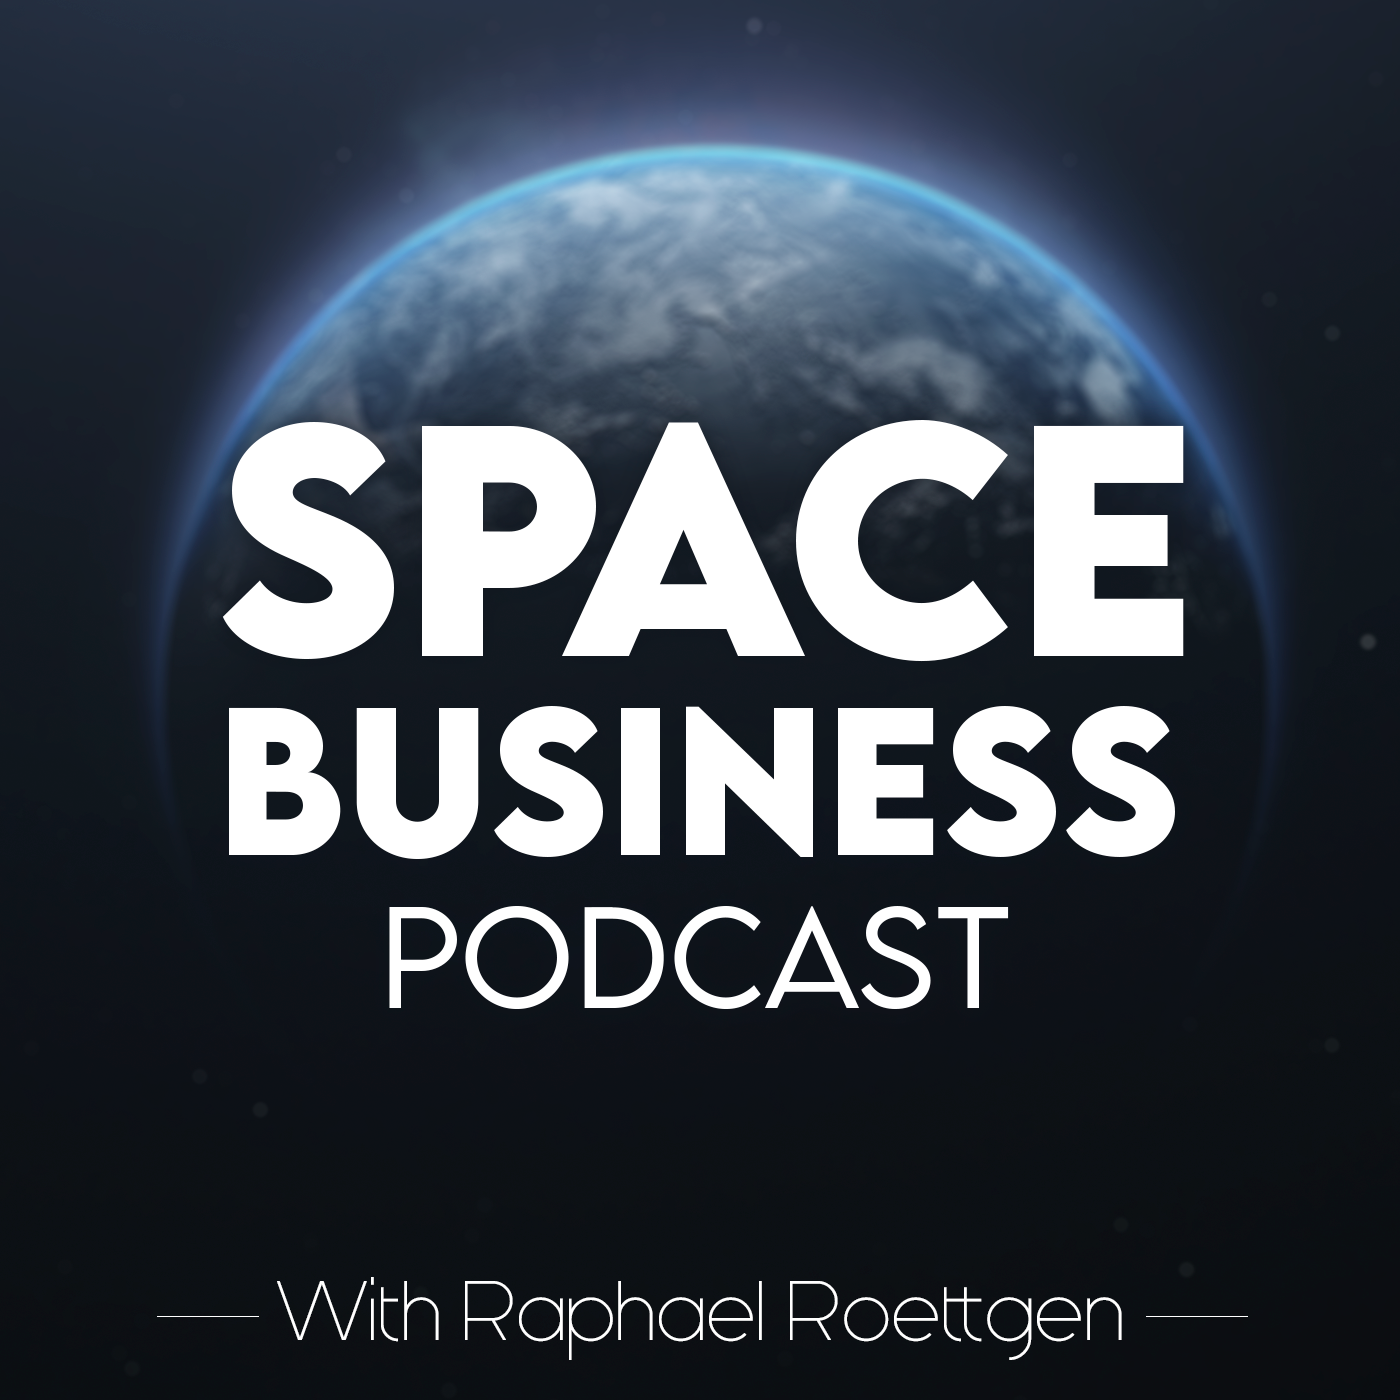 Space business podcast